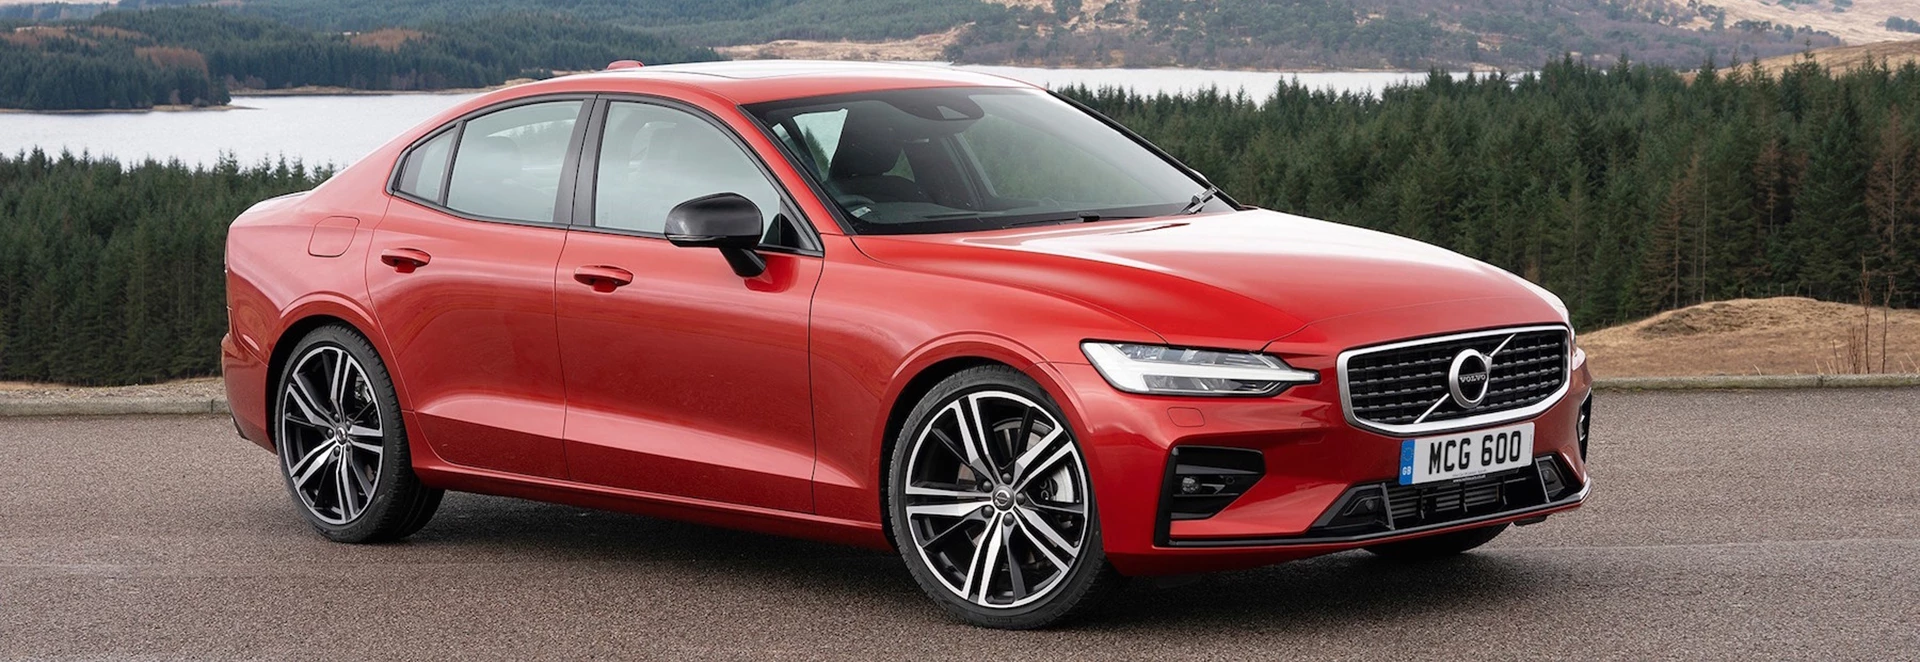 Volvo S60 2019 review 